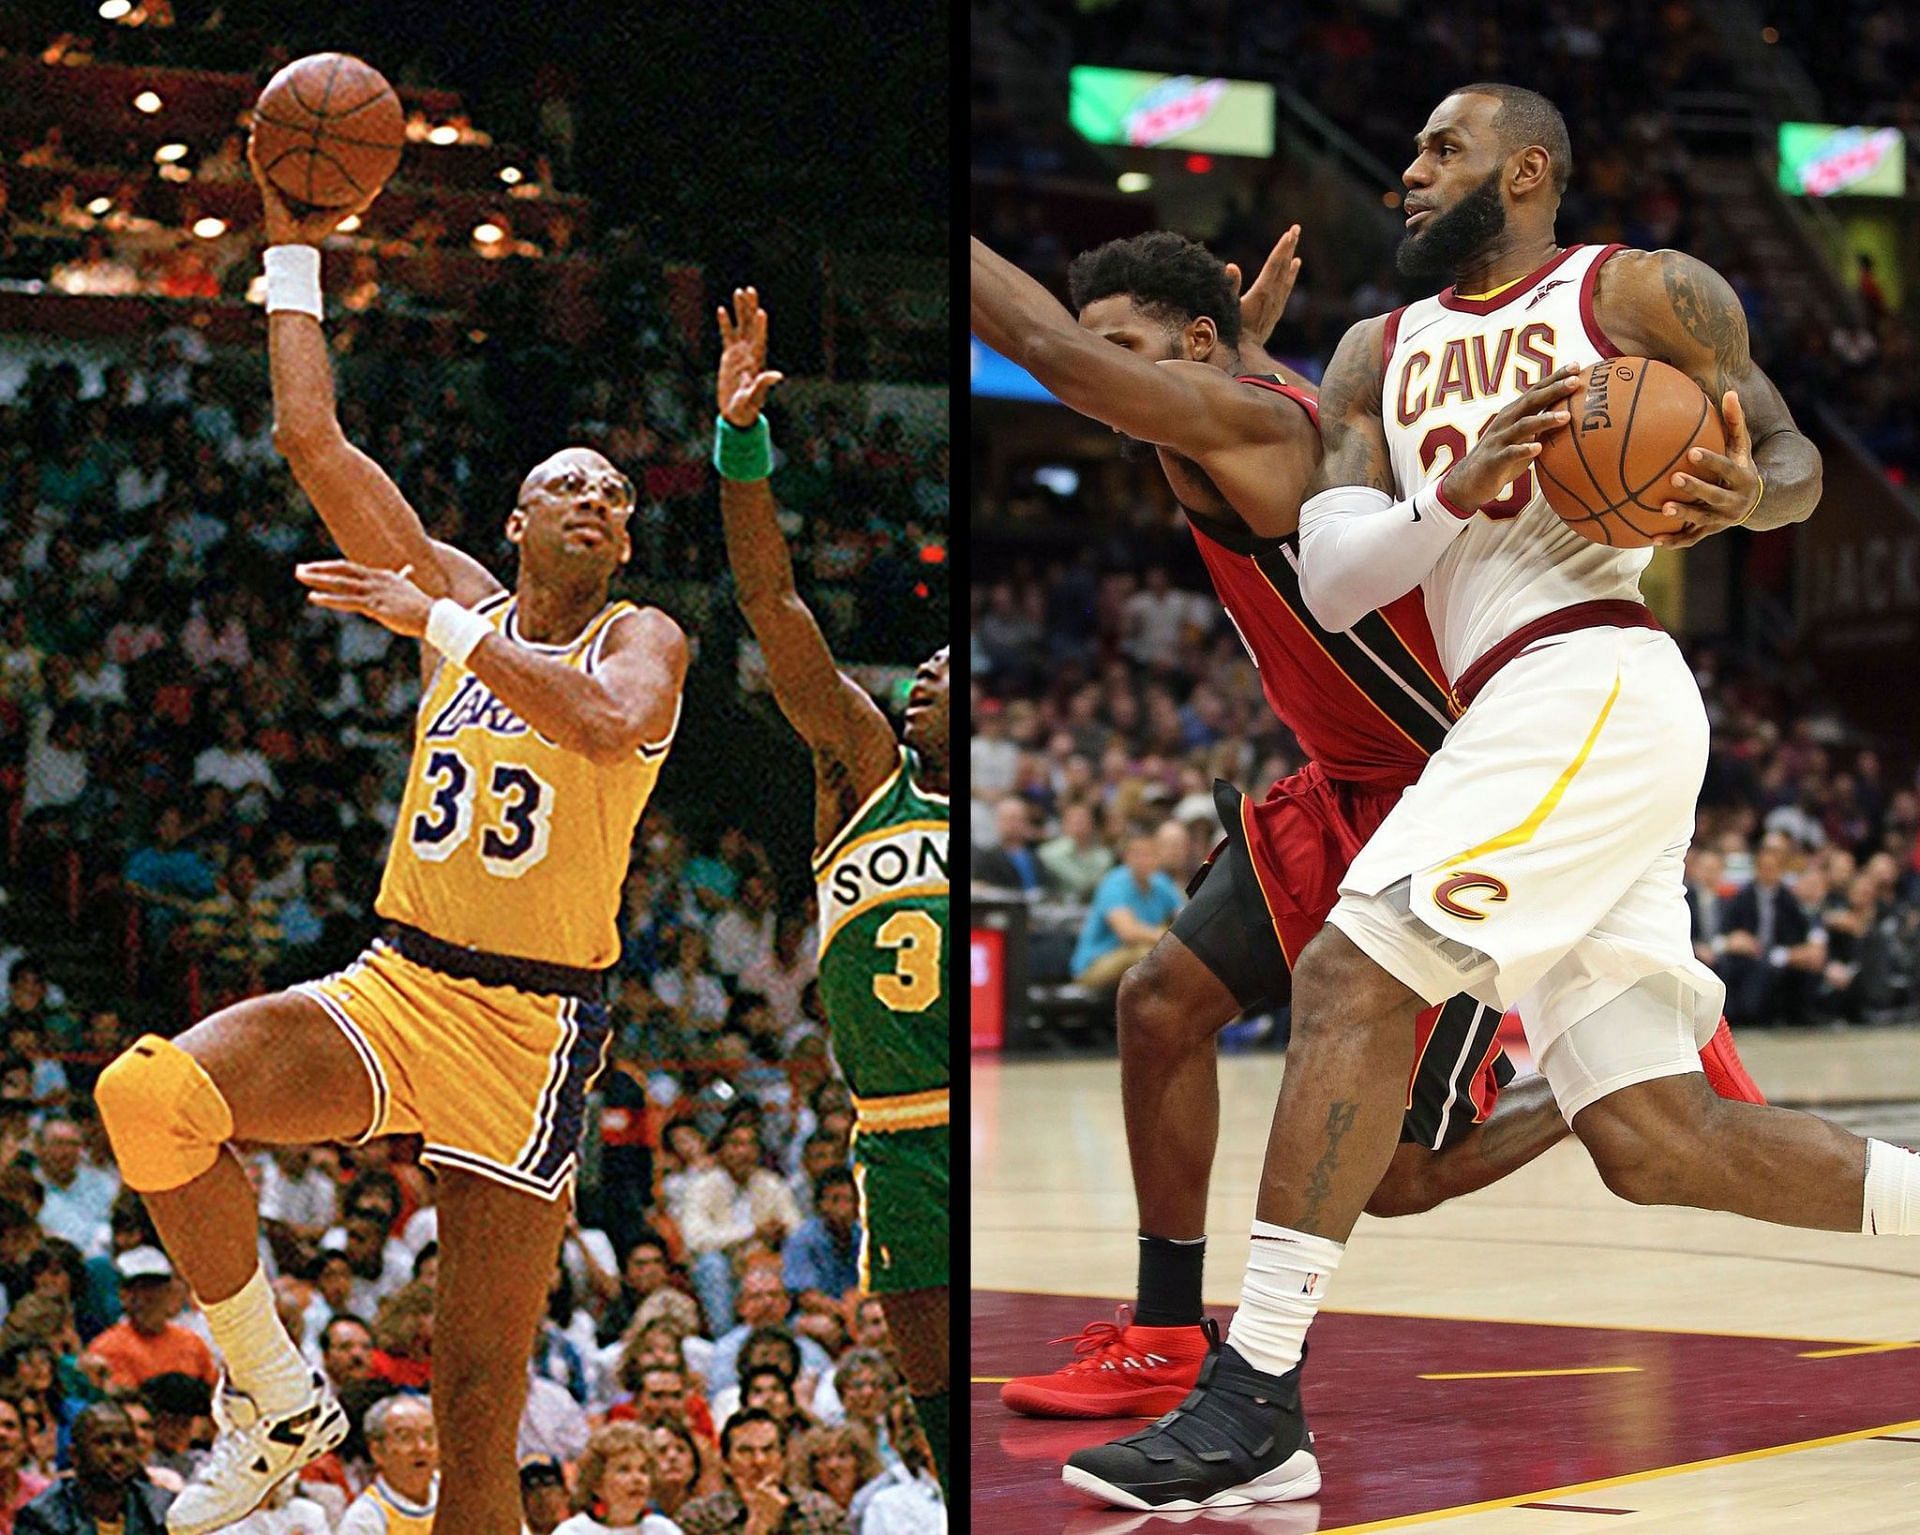 Kareem Abdul-Jabbar&#039;s all-time scoring record is just a matter of time with how LeBron James has been playing. [Photo: Cleveland.com]